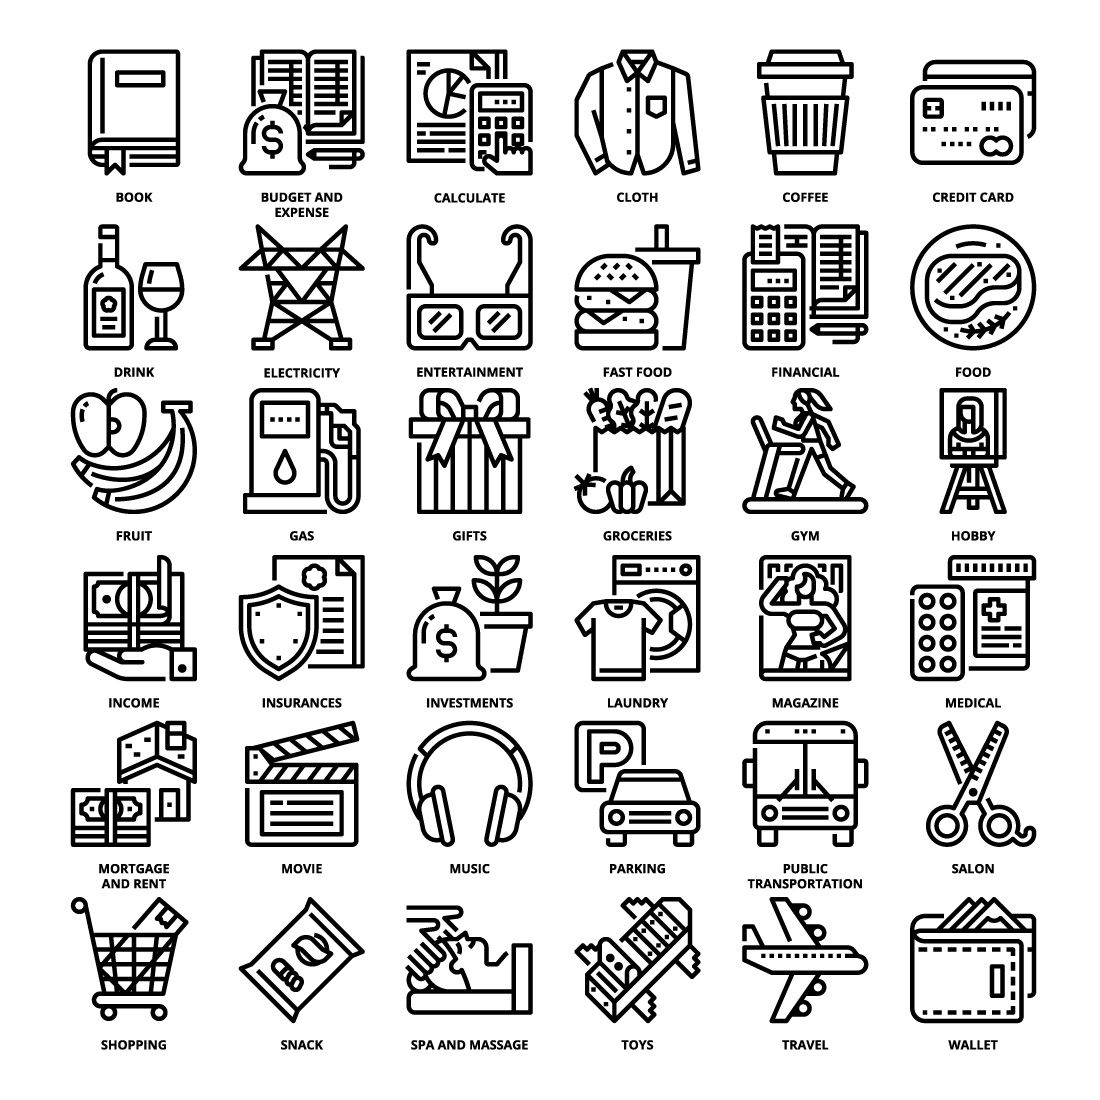 36 Budget and Expense Intelligence Icons Set x 4 Styles preview image.